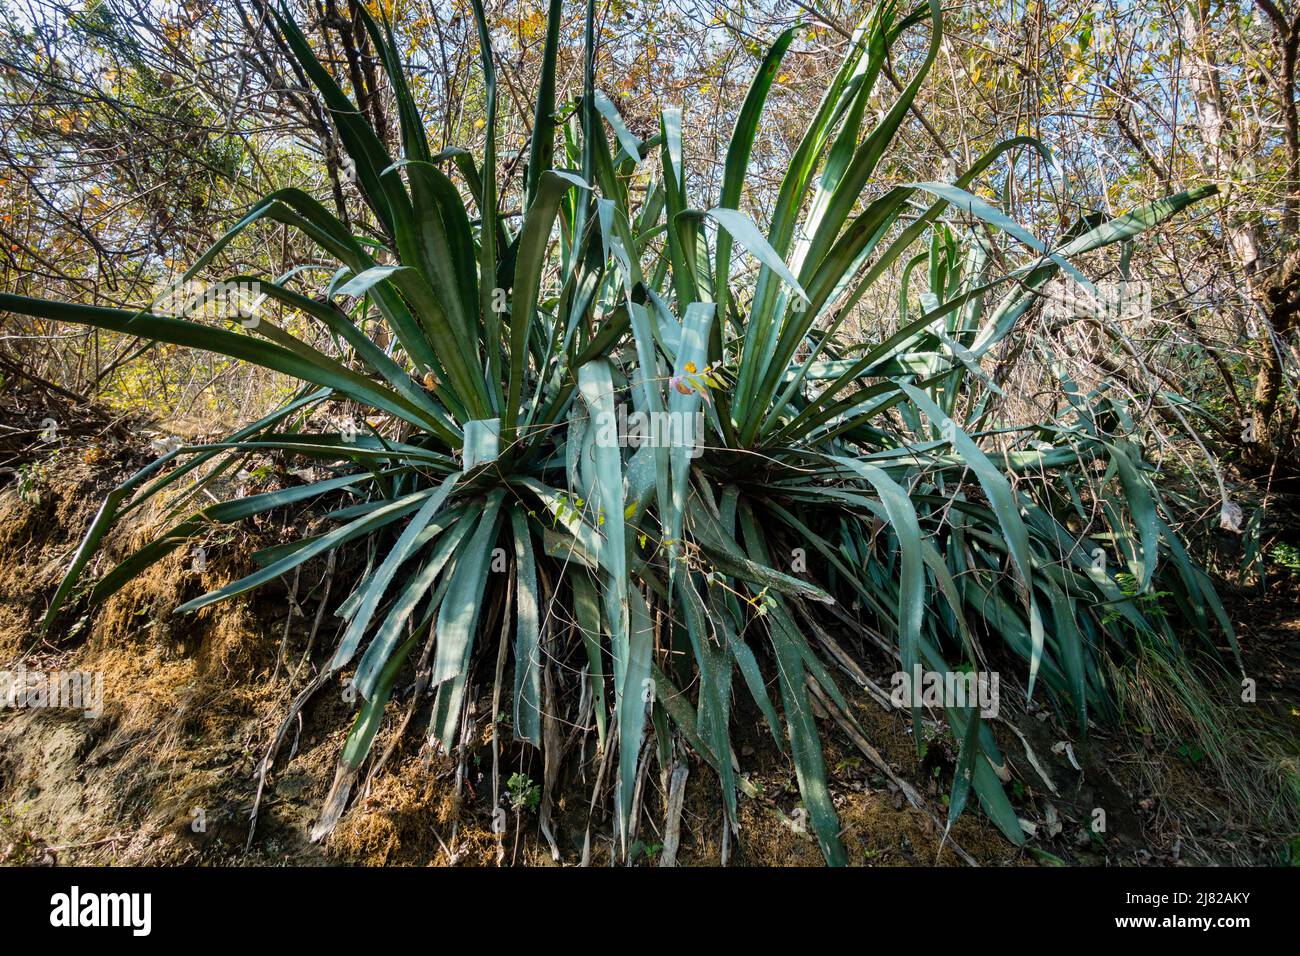 A big Aloe vera plant growing in an Indian forest. Aloe Vera is a cactus like plant that grows in hot, dry climates. Stock Photo